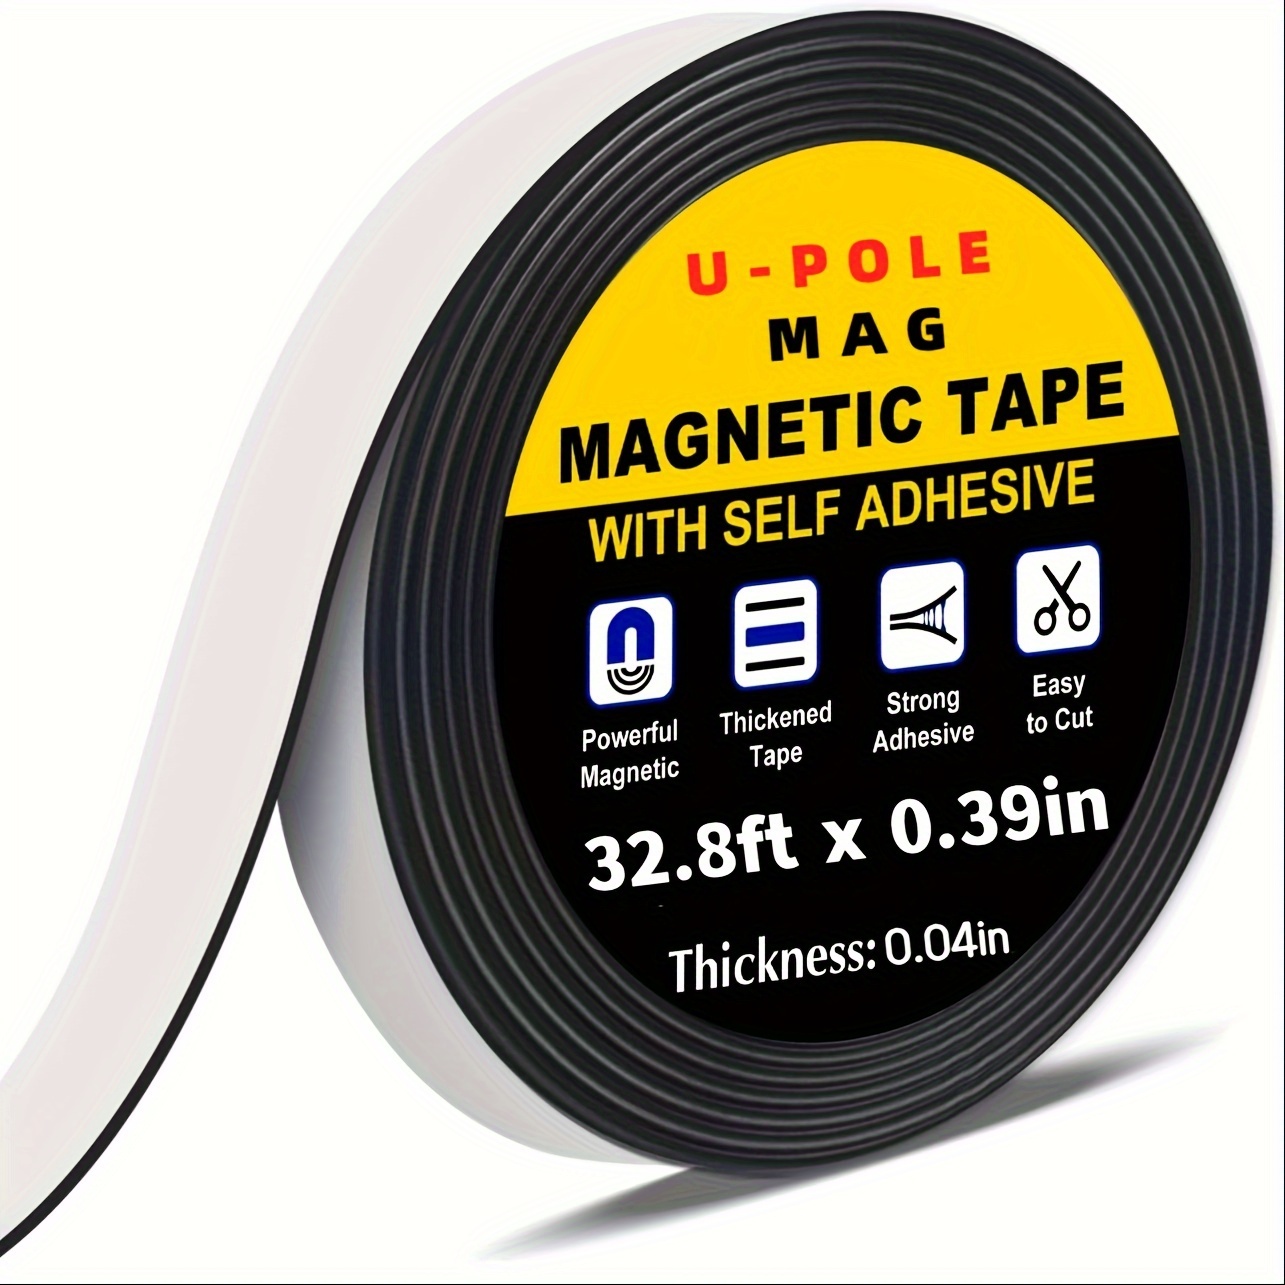 

Magnetic Tape With Strong Self Adhesive Flexible Magnetic Strip Magnet Tape Roll Perfect For Craft, Whiteboards & Fridge Organization - 1mm Thick X 0.39inch Wide X 393inch Long